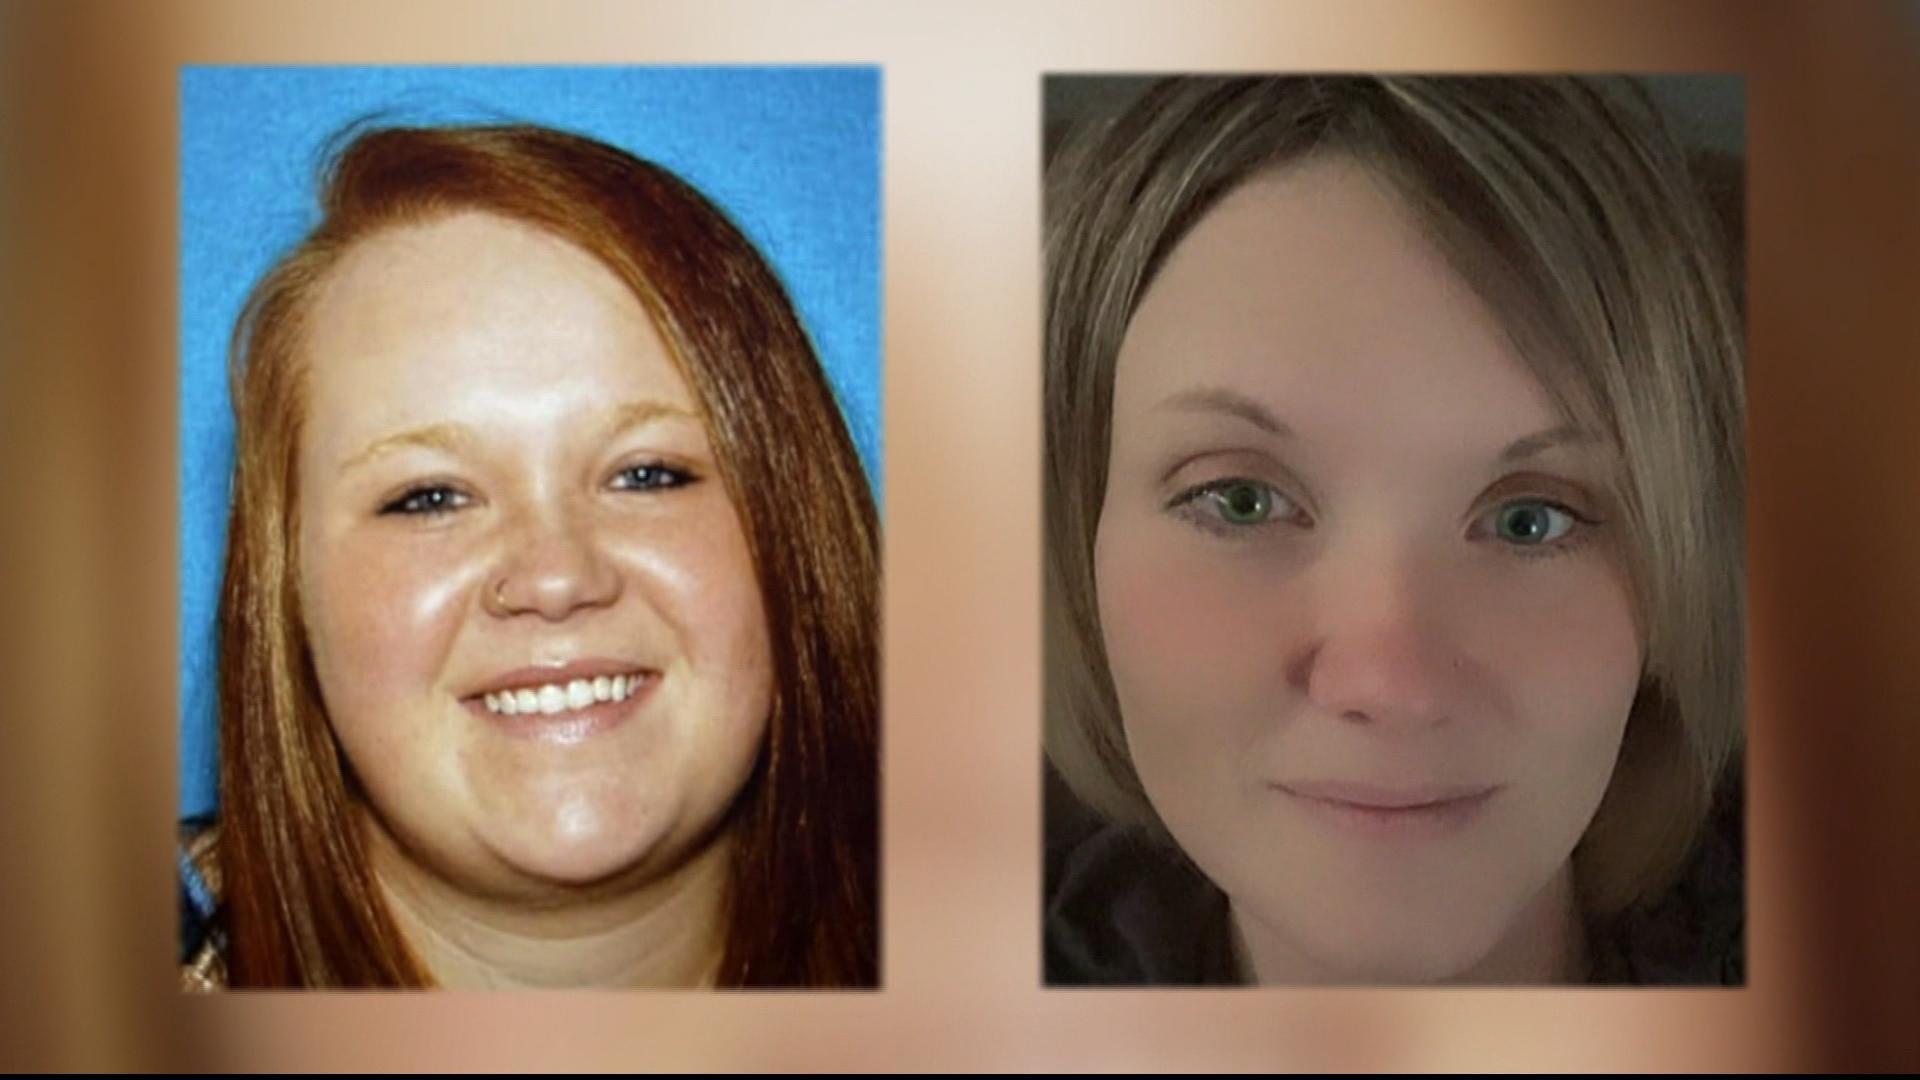 5th person charged in killing of 2 Kansas moms, officials say